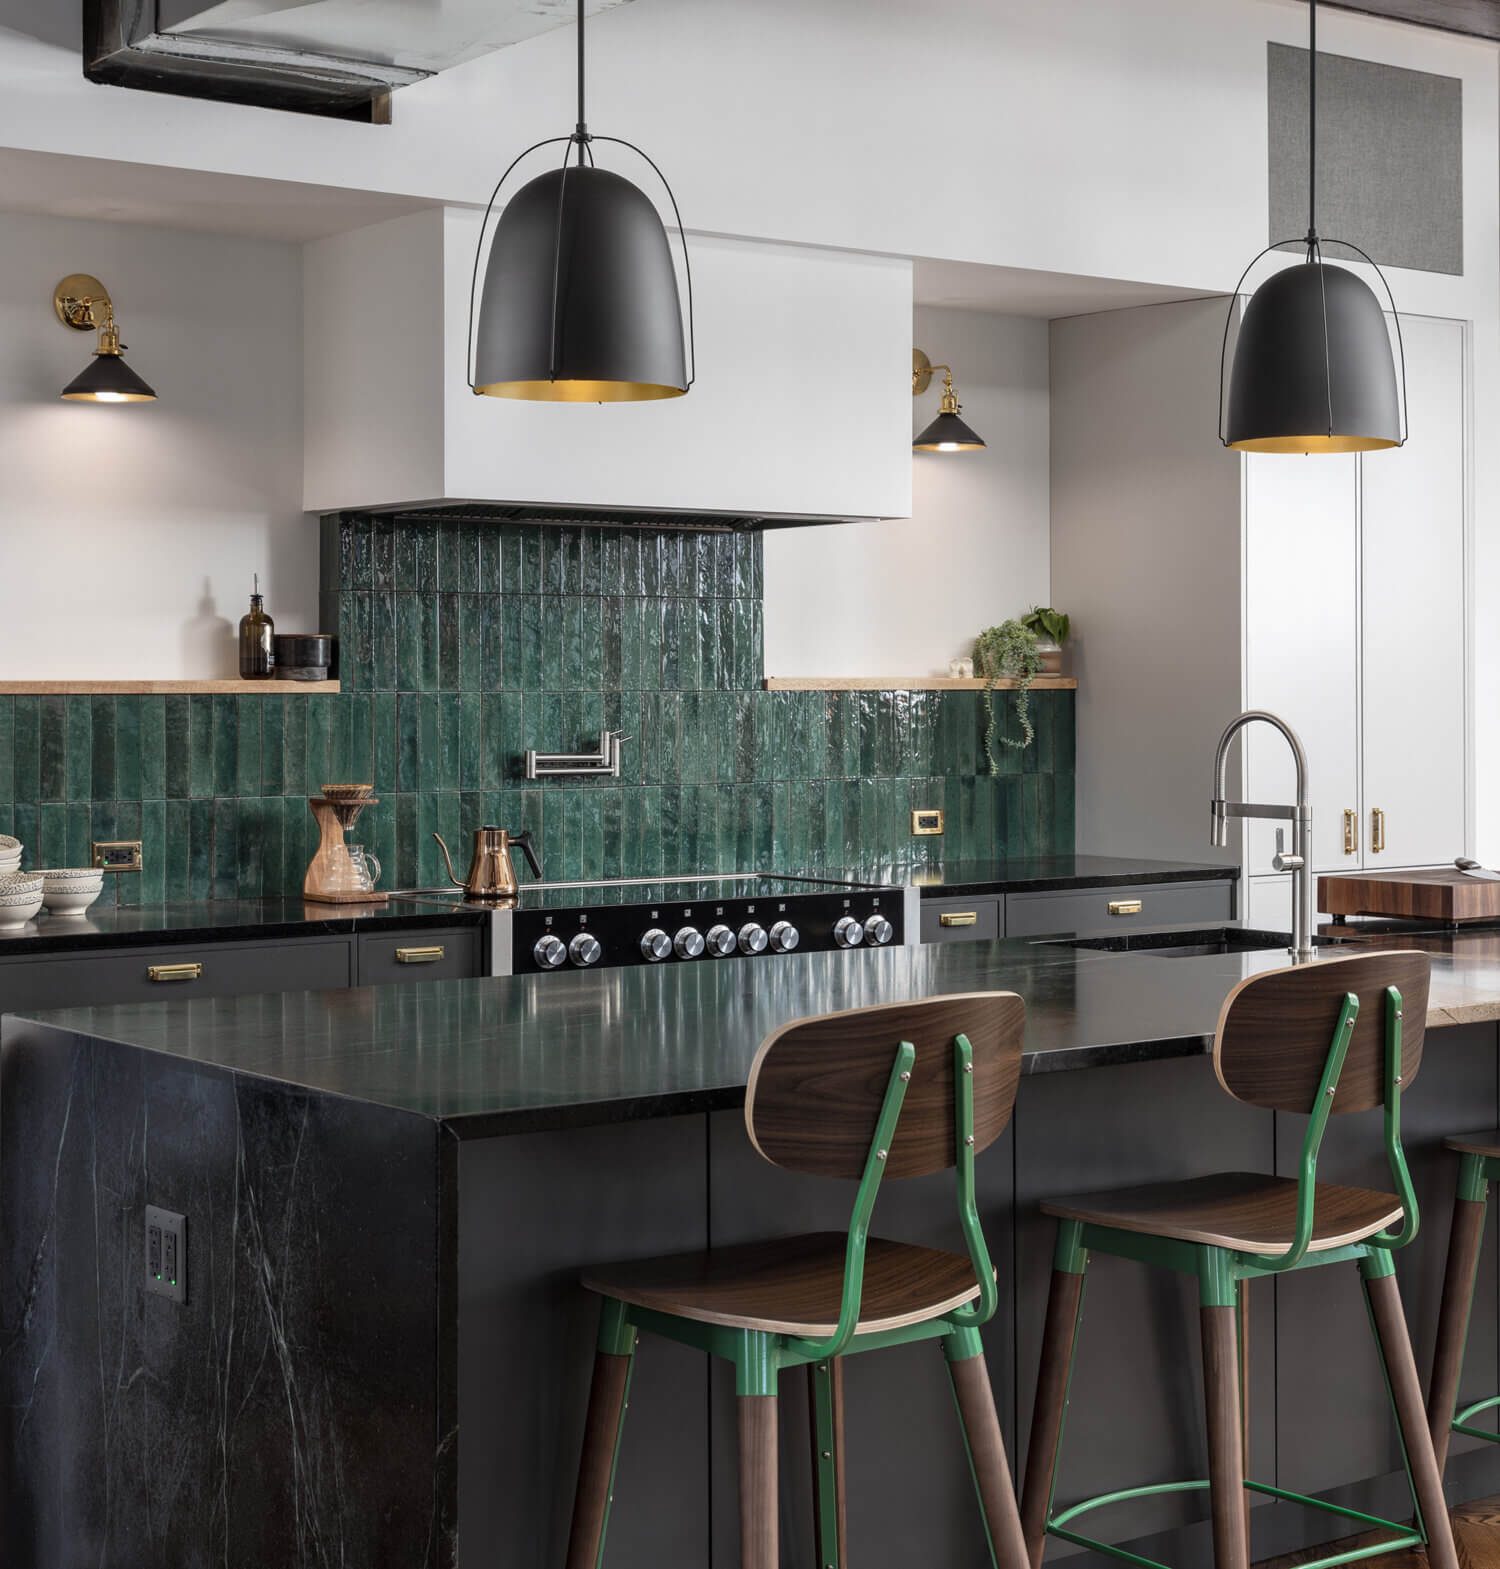 A modern kitchen with an emerald green charcoal black, and white color palette featuring a modern skinny shaker door style from Dura Supreme Cabinetry.